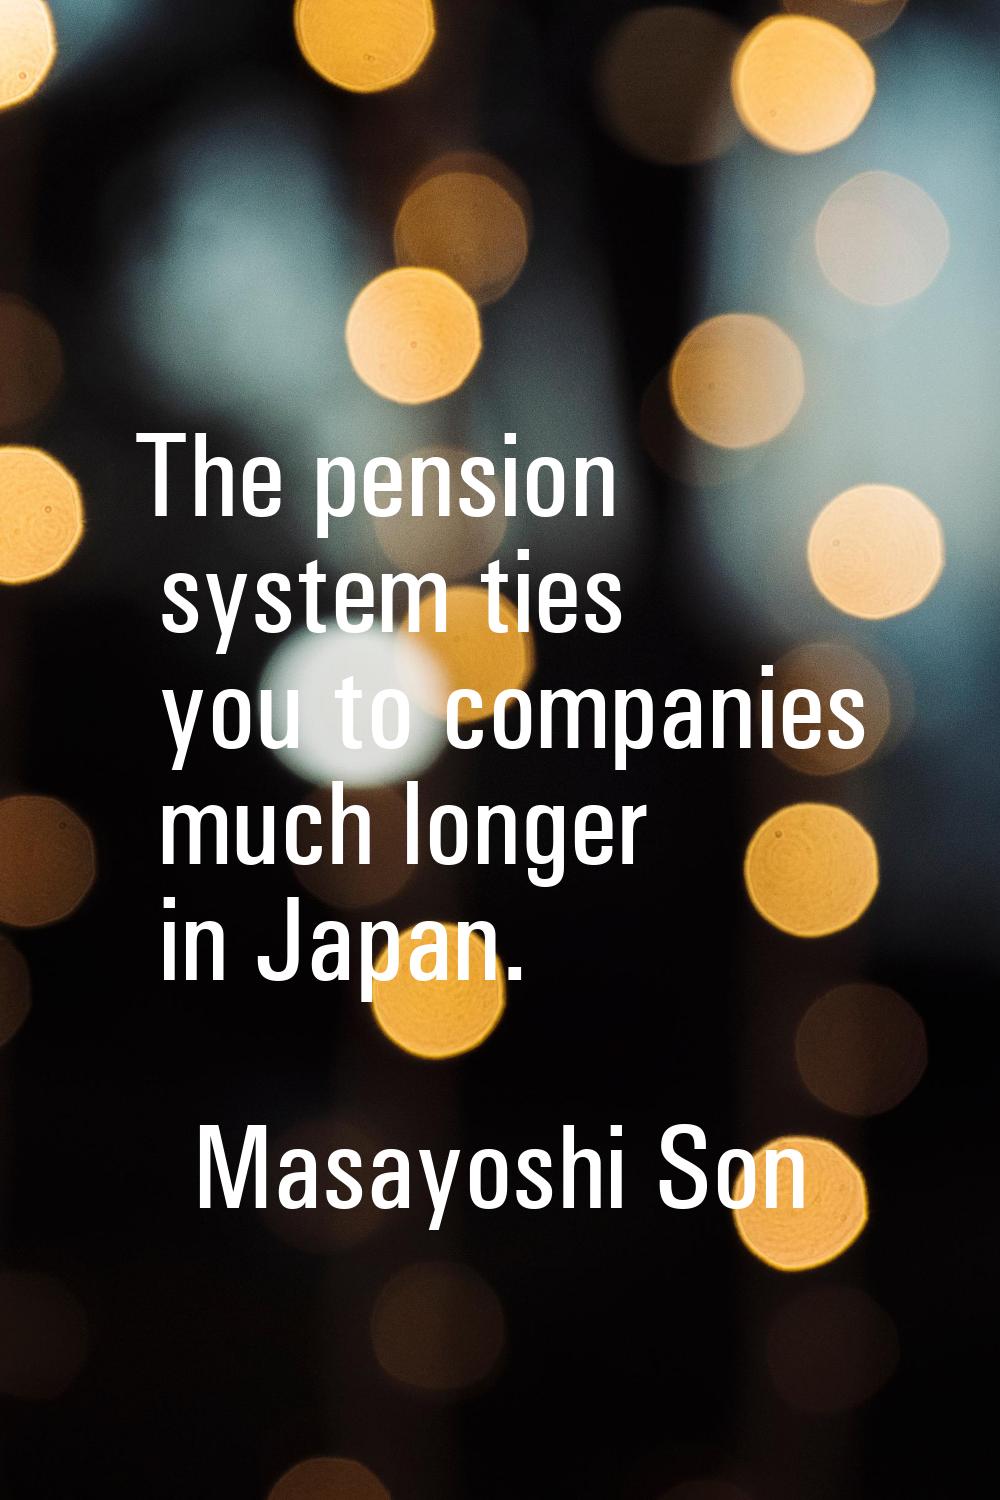 The pension system ties you to companies much longer in Japan.